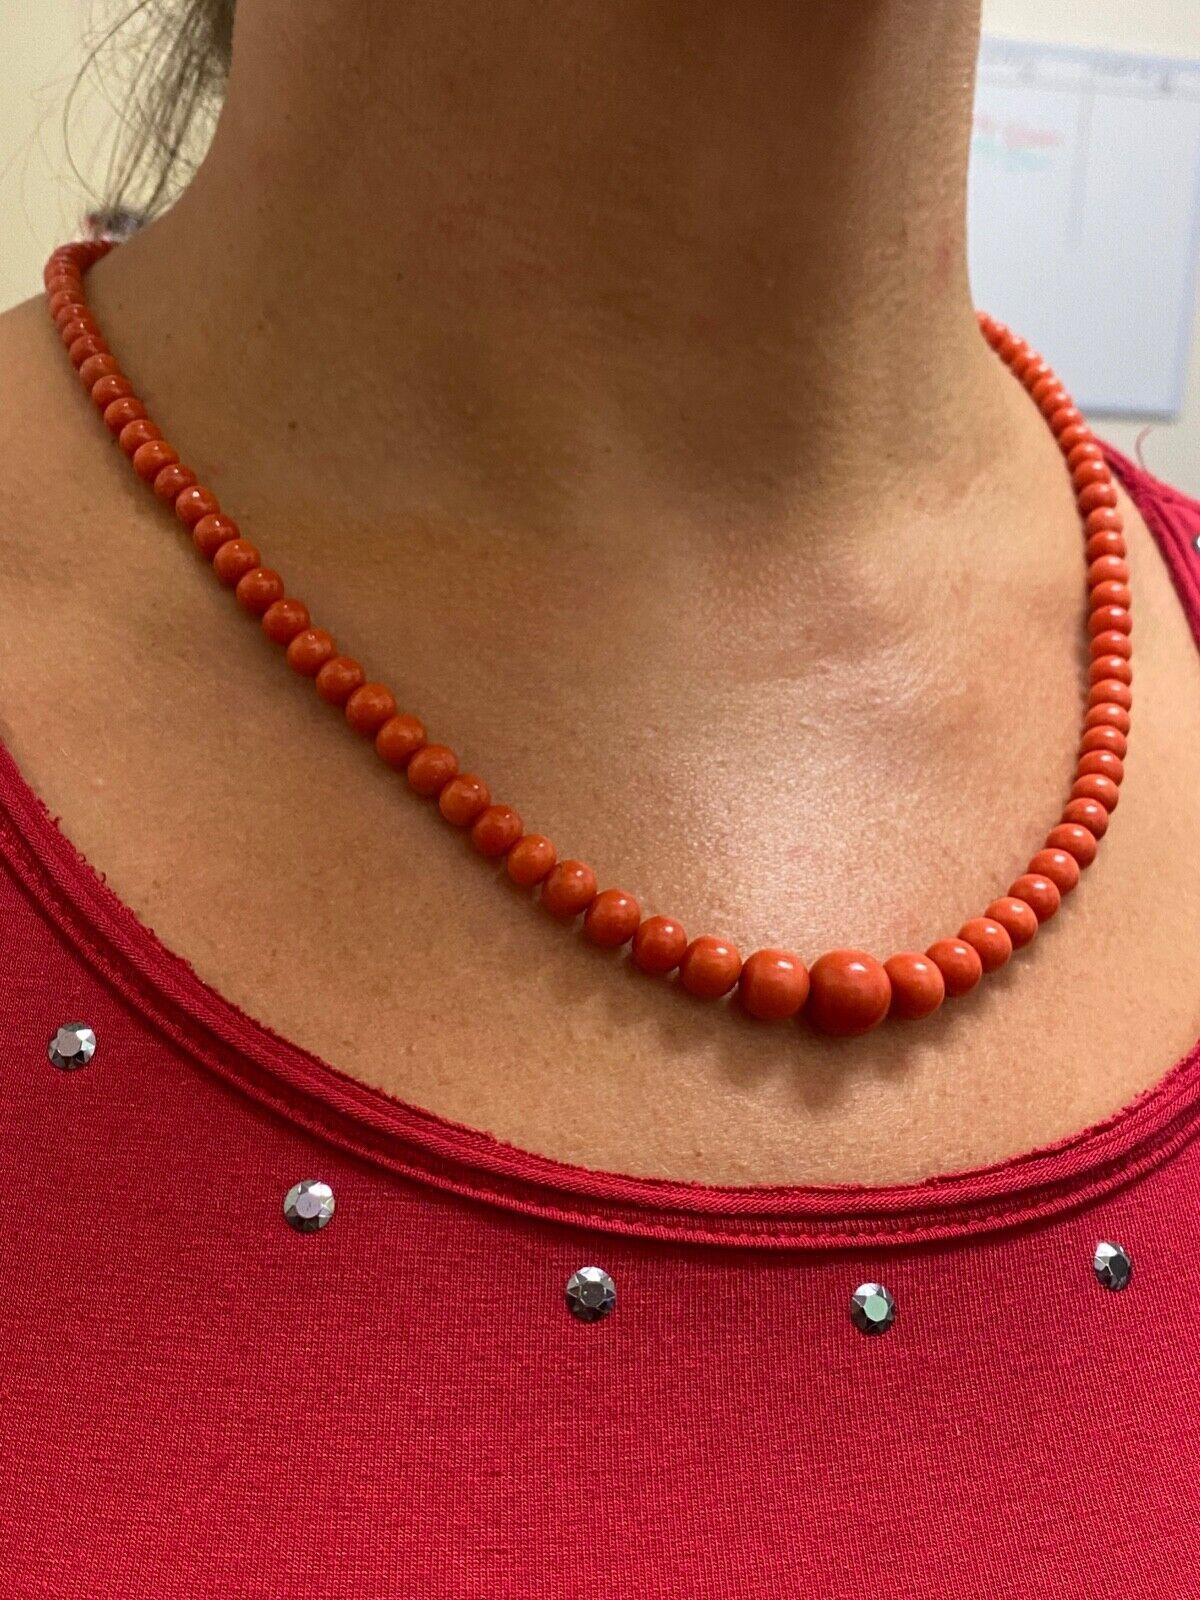 Bead Mediterranean Natural Dusty Pinkish Red Coral 18K 18ct 750 Gold Necklace For Sale